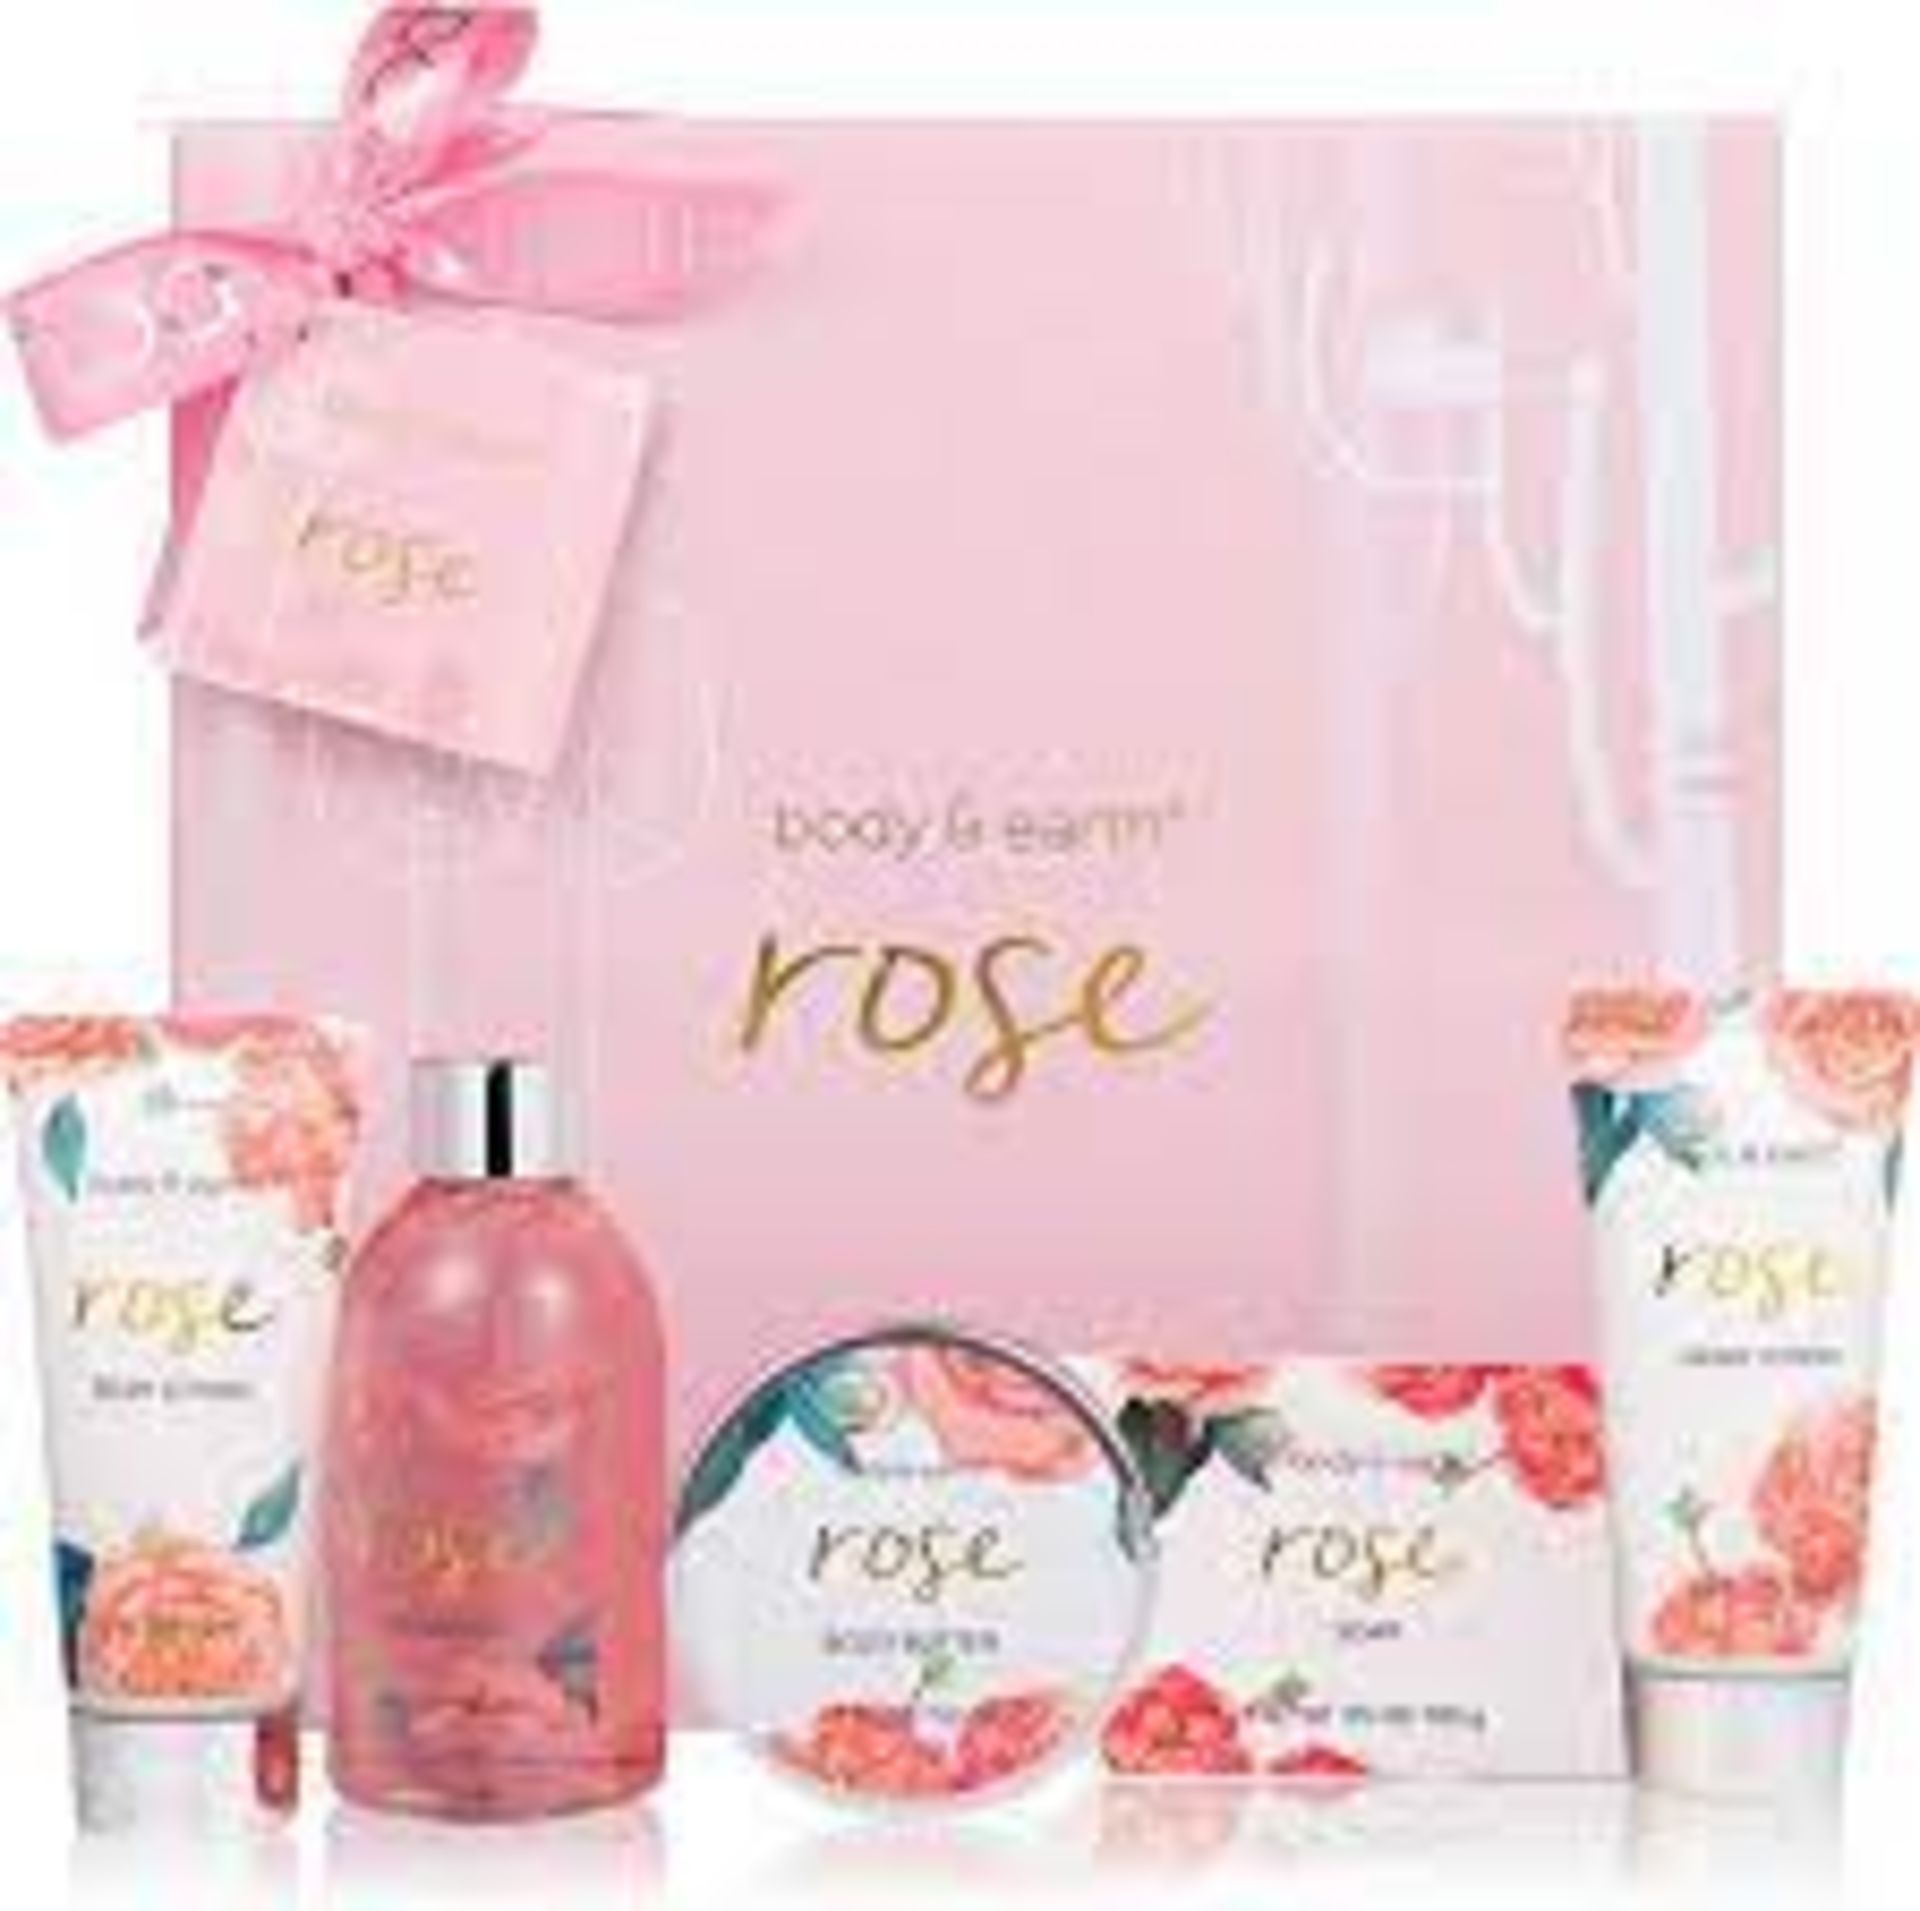 4 X NEW PACKAGED 6 Piece Rose Bath Gift Box. (SKU: SPA-6-ROSE). 6 Pcs Bath Gift Baskets: Our